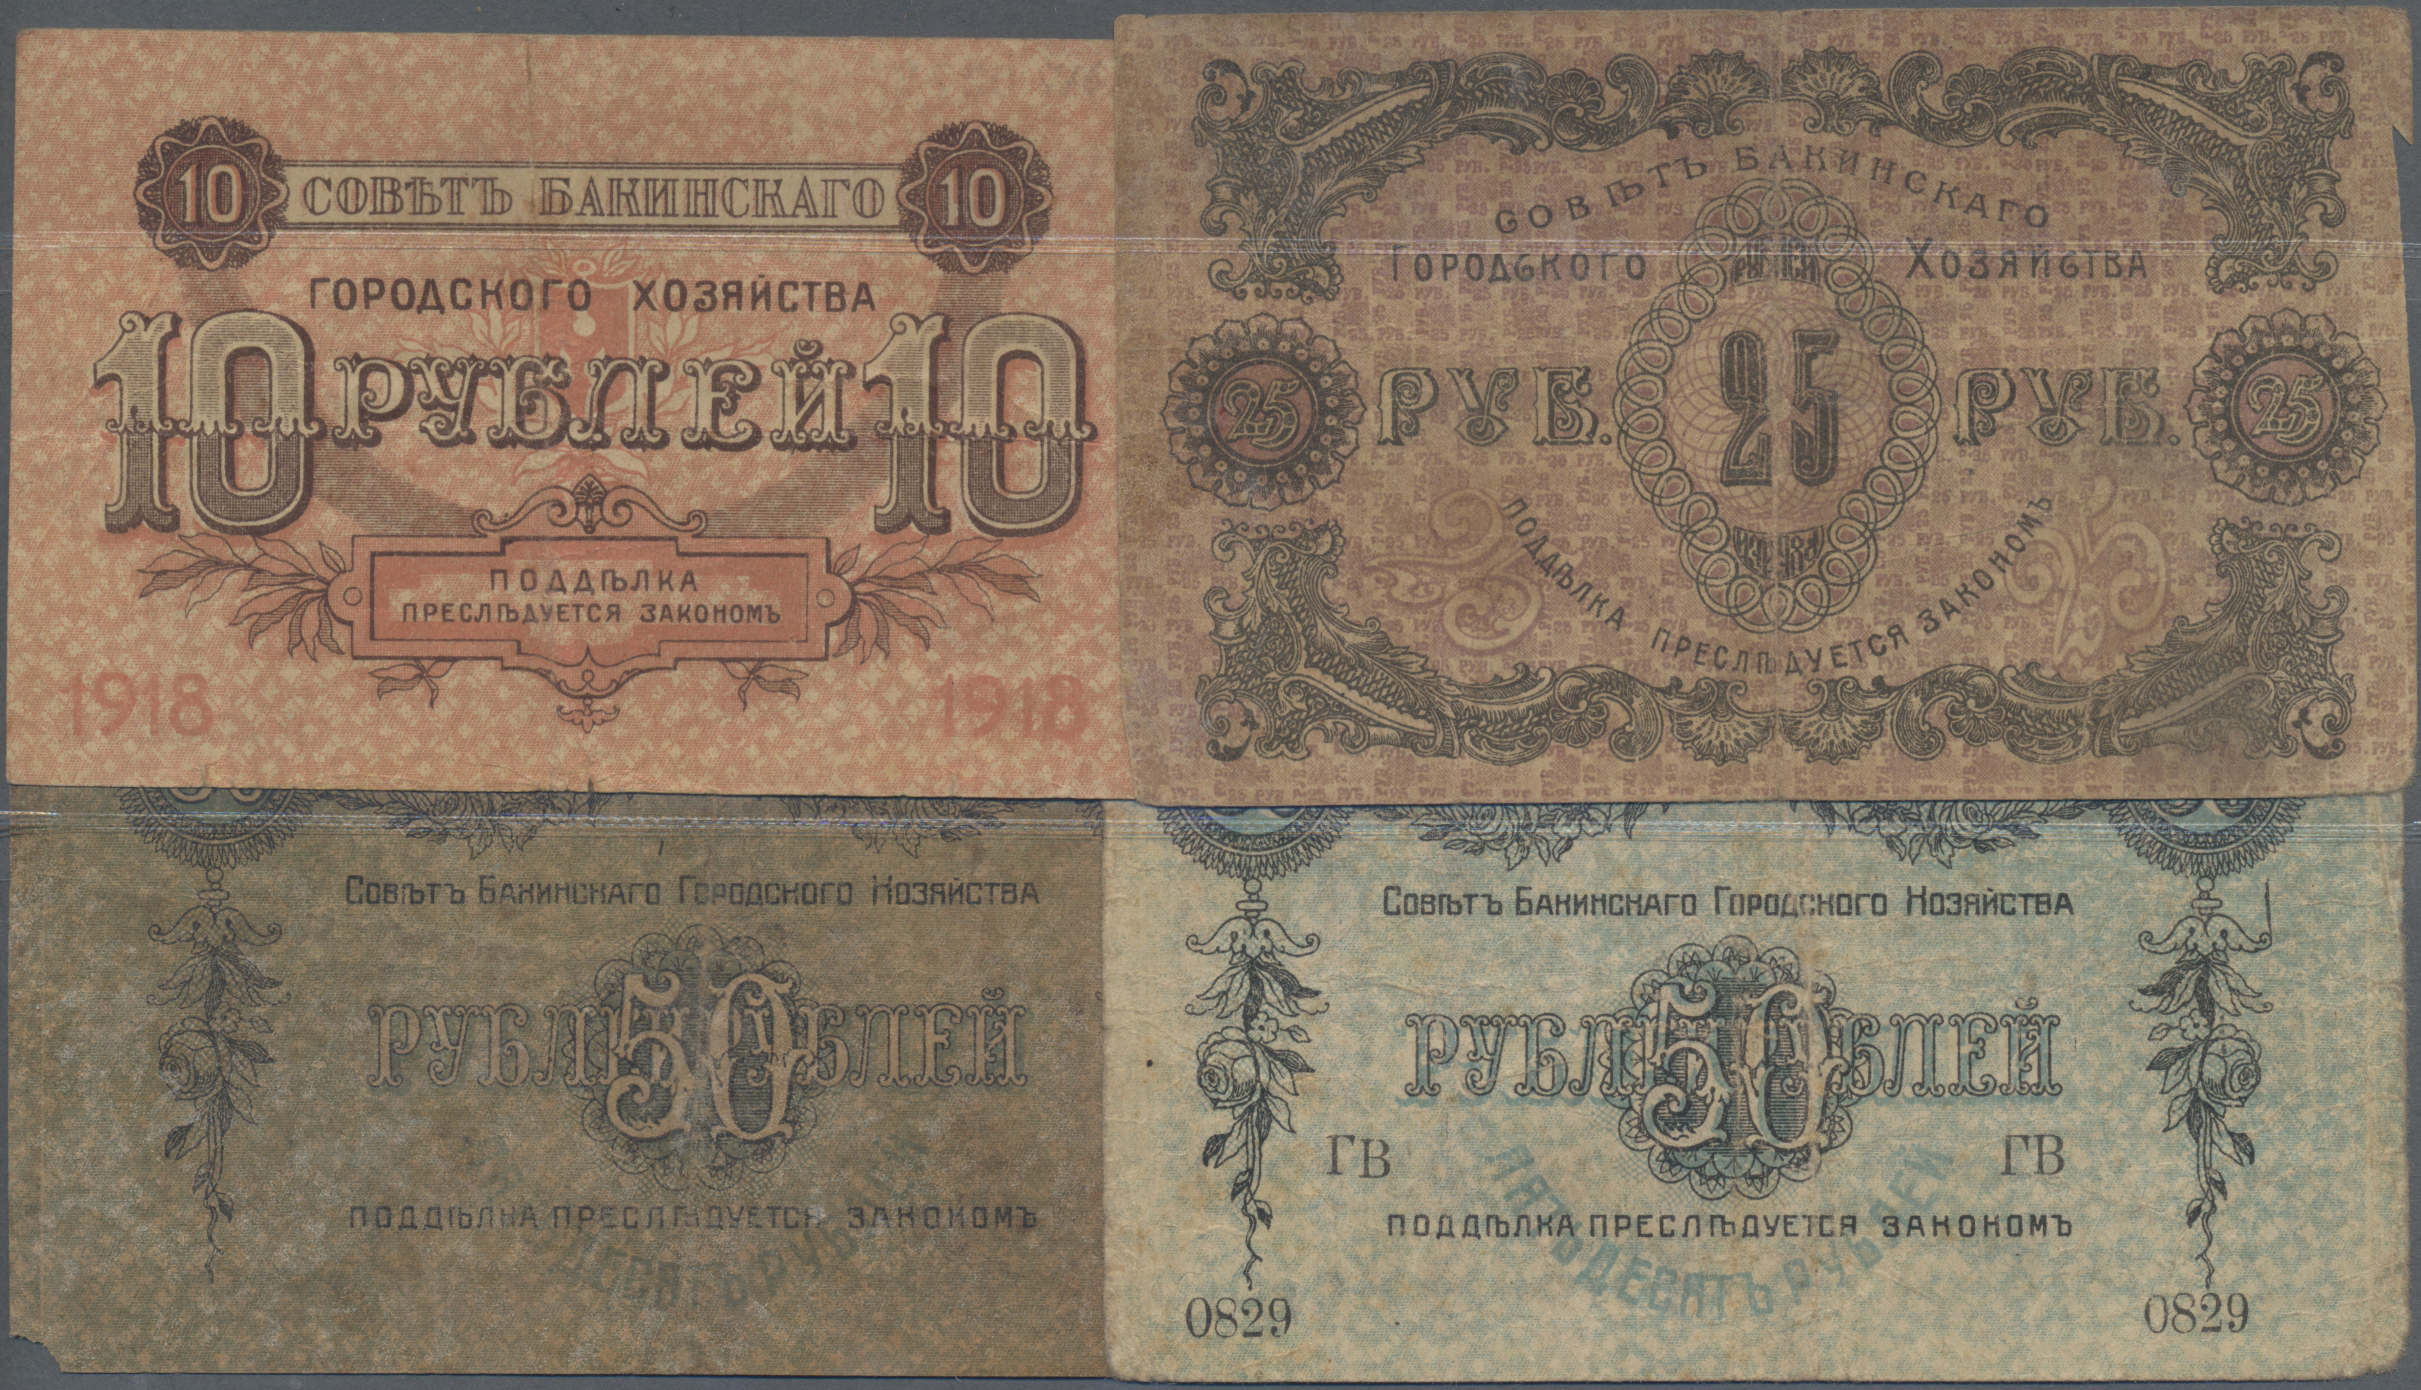 Lot 00410 - Russia / Russland | Banknoten  -  Auktionshaus Christoph Gärtner GmbH & Co. KG 55th AUCTION - Day 1